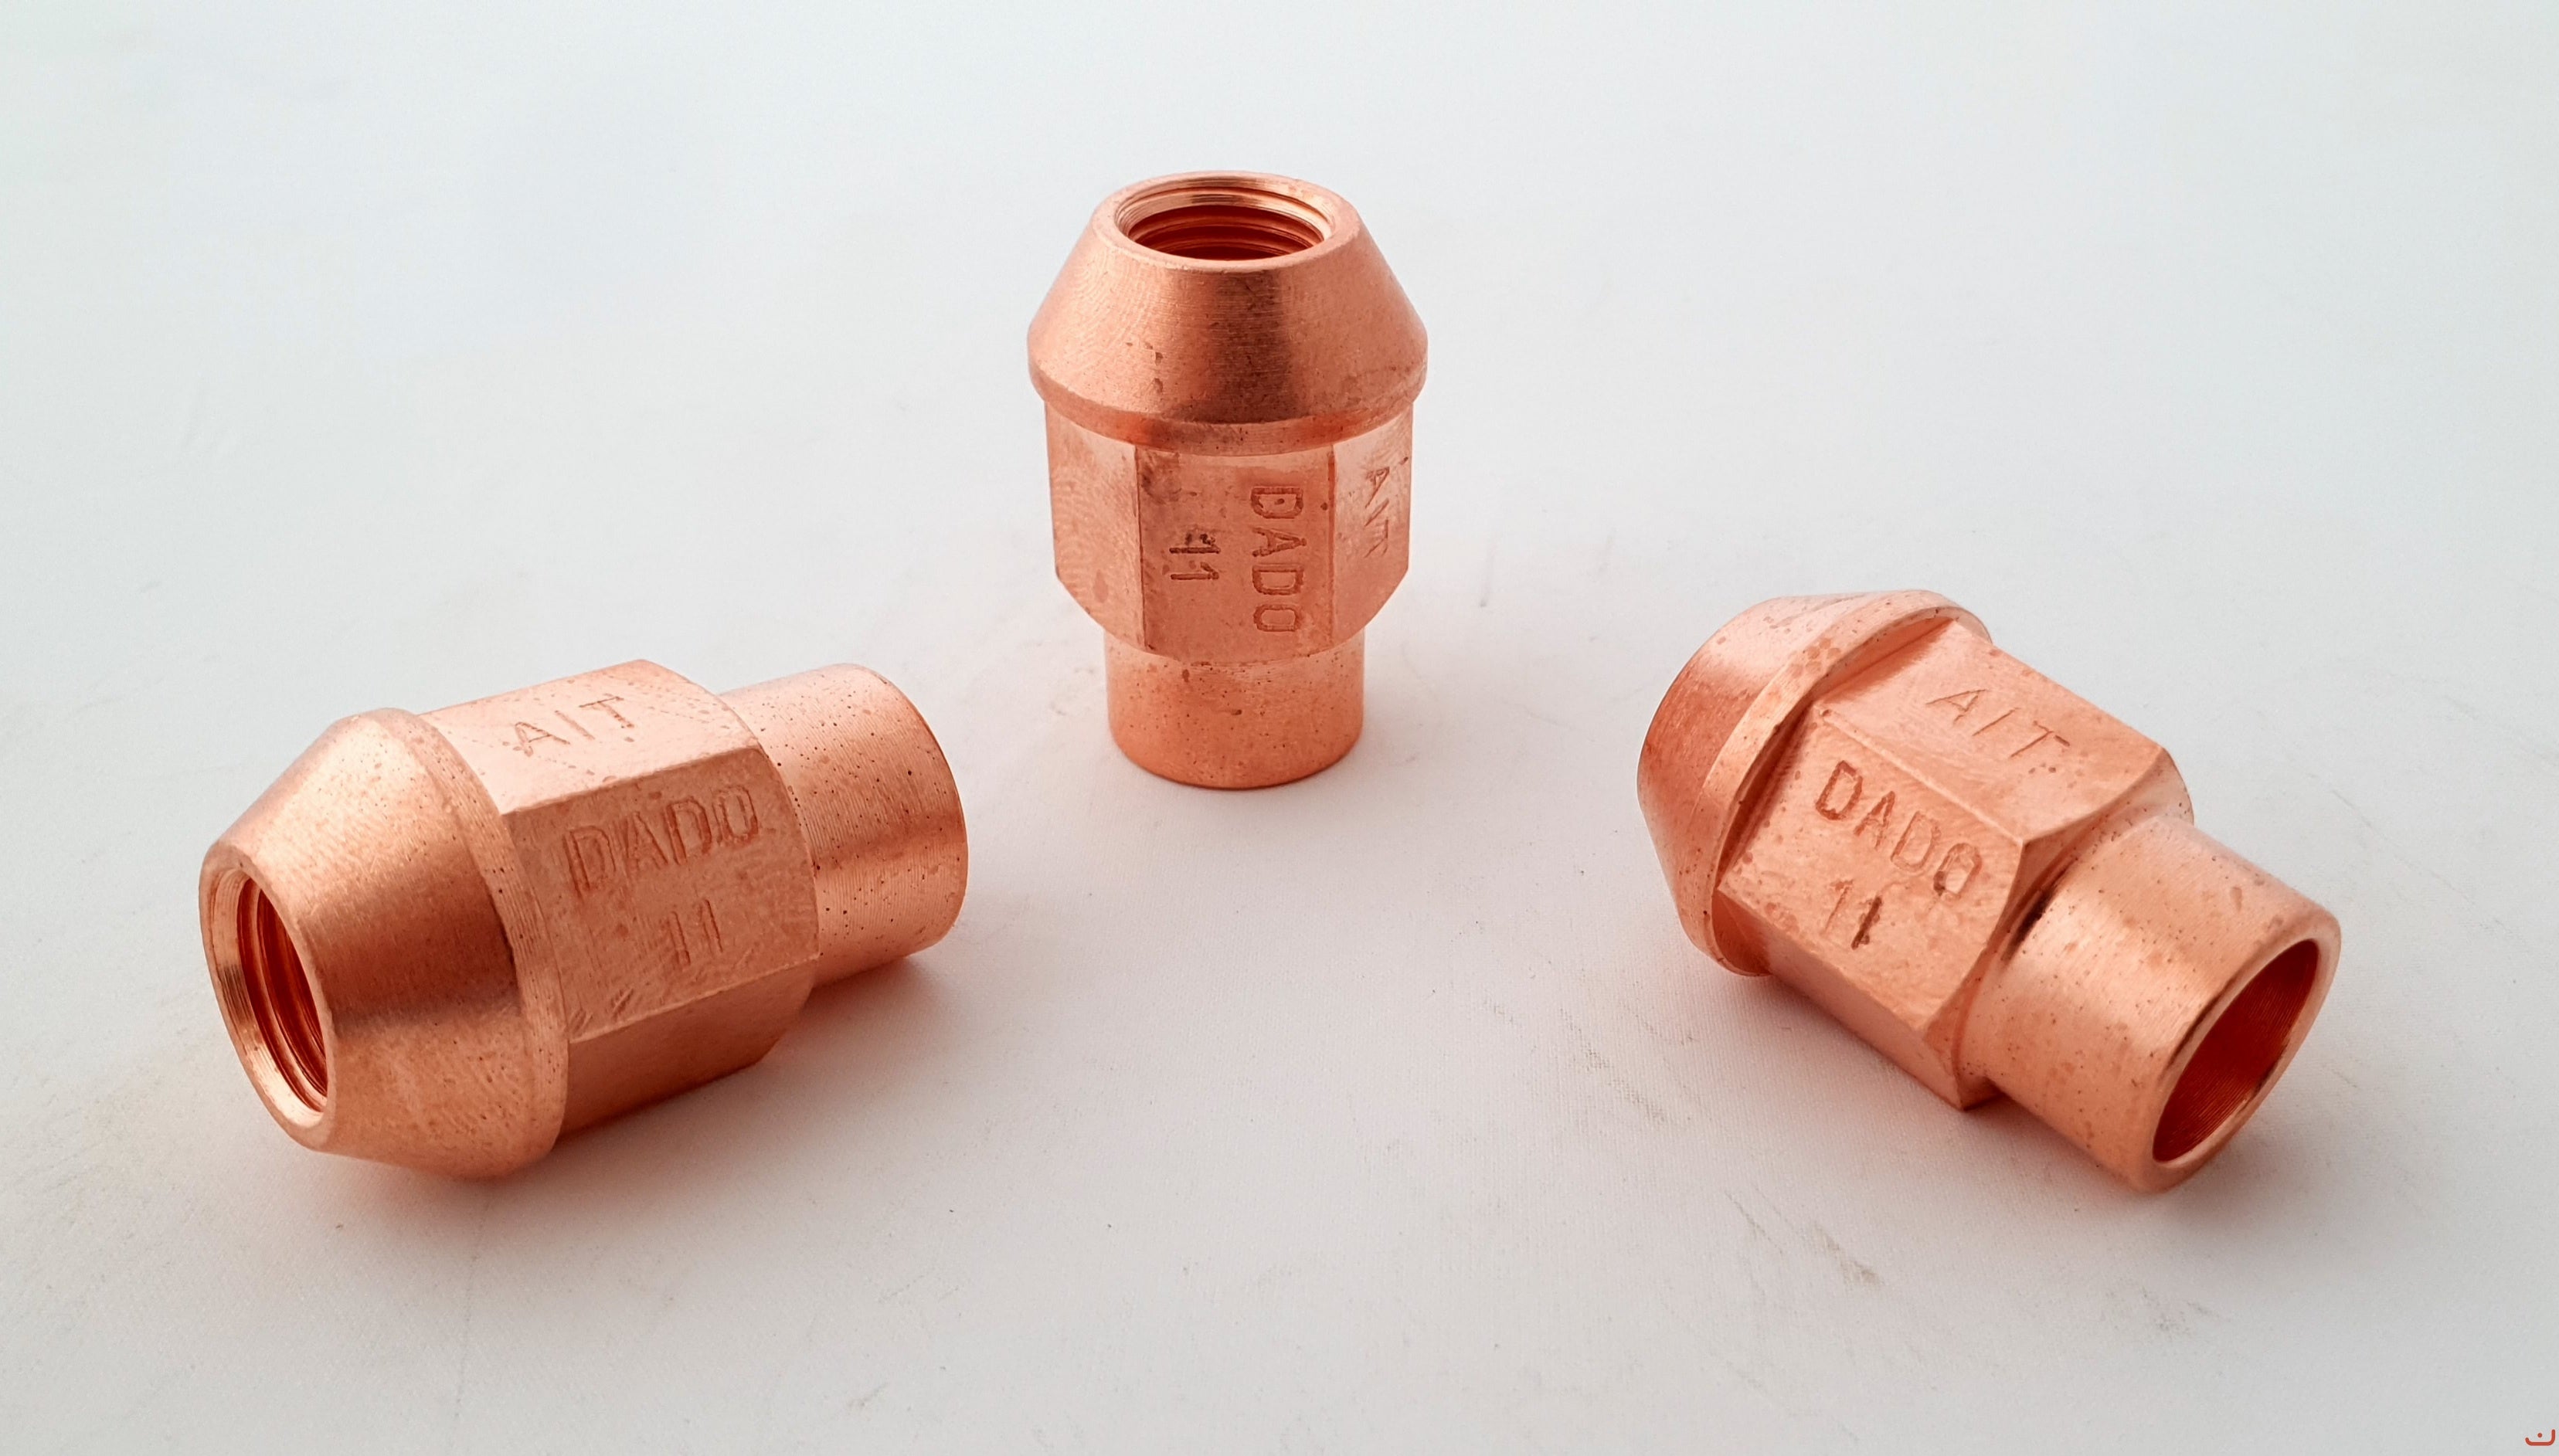 AITECH AIT-DADO-11 Гайка 12x1,25 ex 19mm, od 23mm steel coppered nut conical SEAT, total lenght 33mm Photo-1 